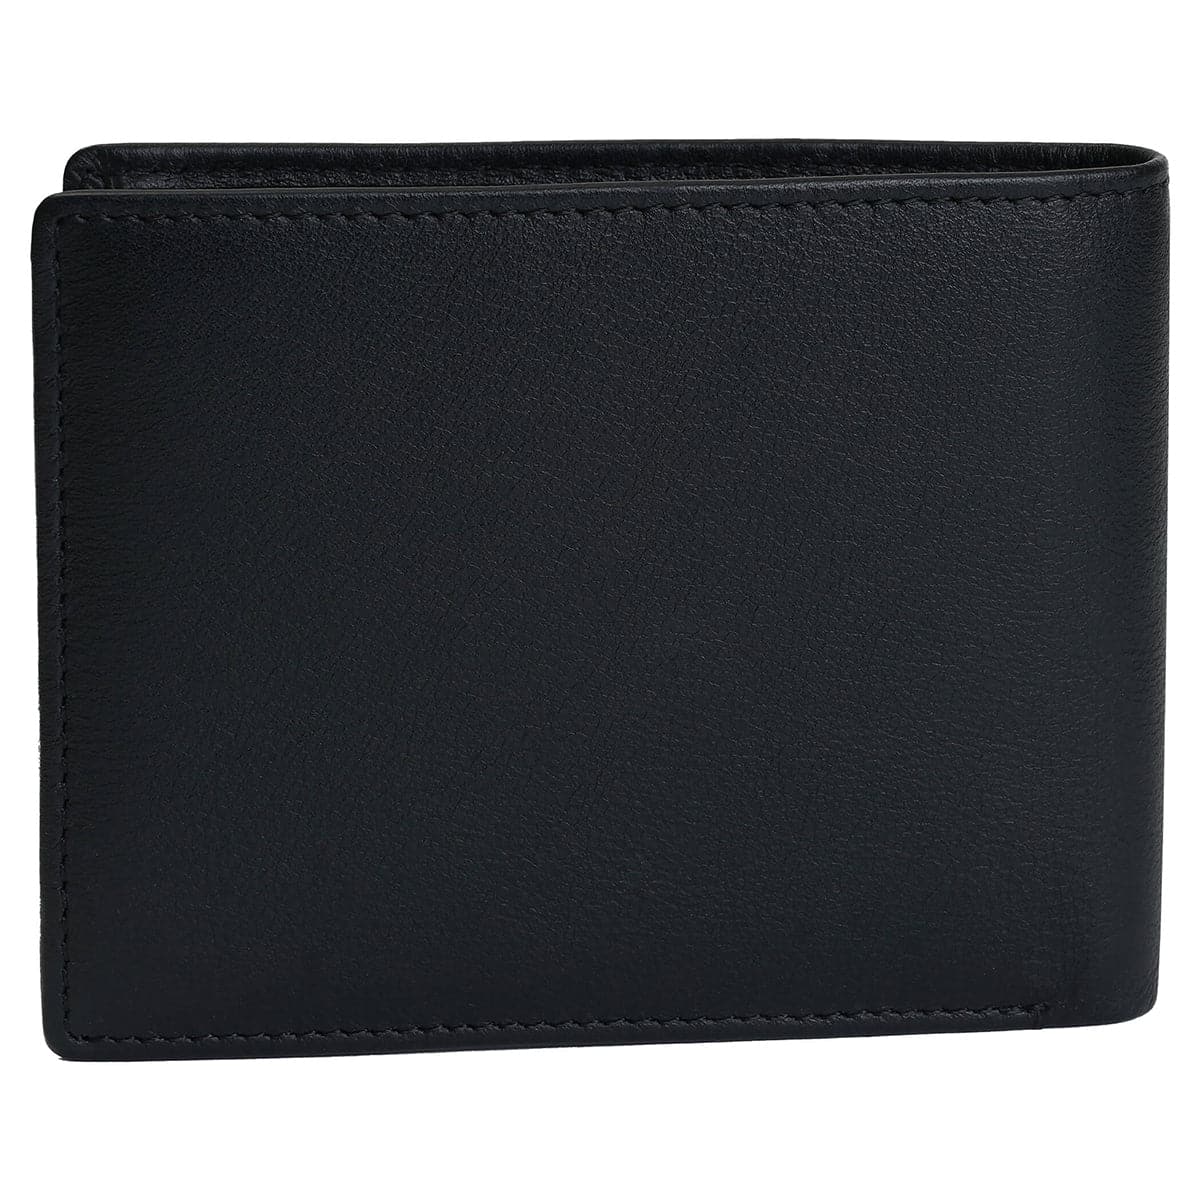 Mancini Sonoma Secure RFID Center Wing Wallet